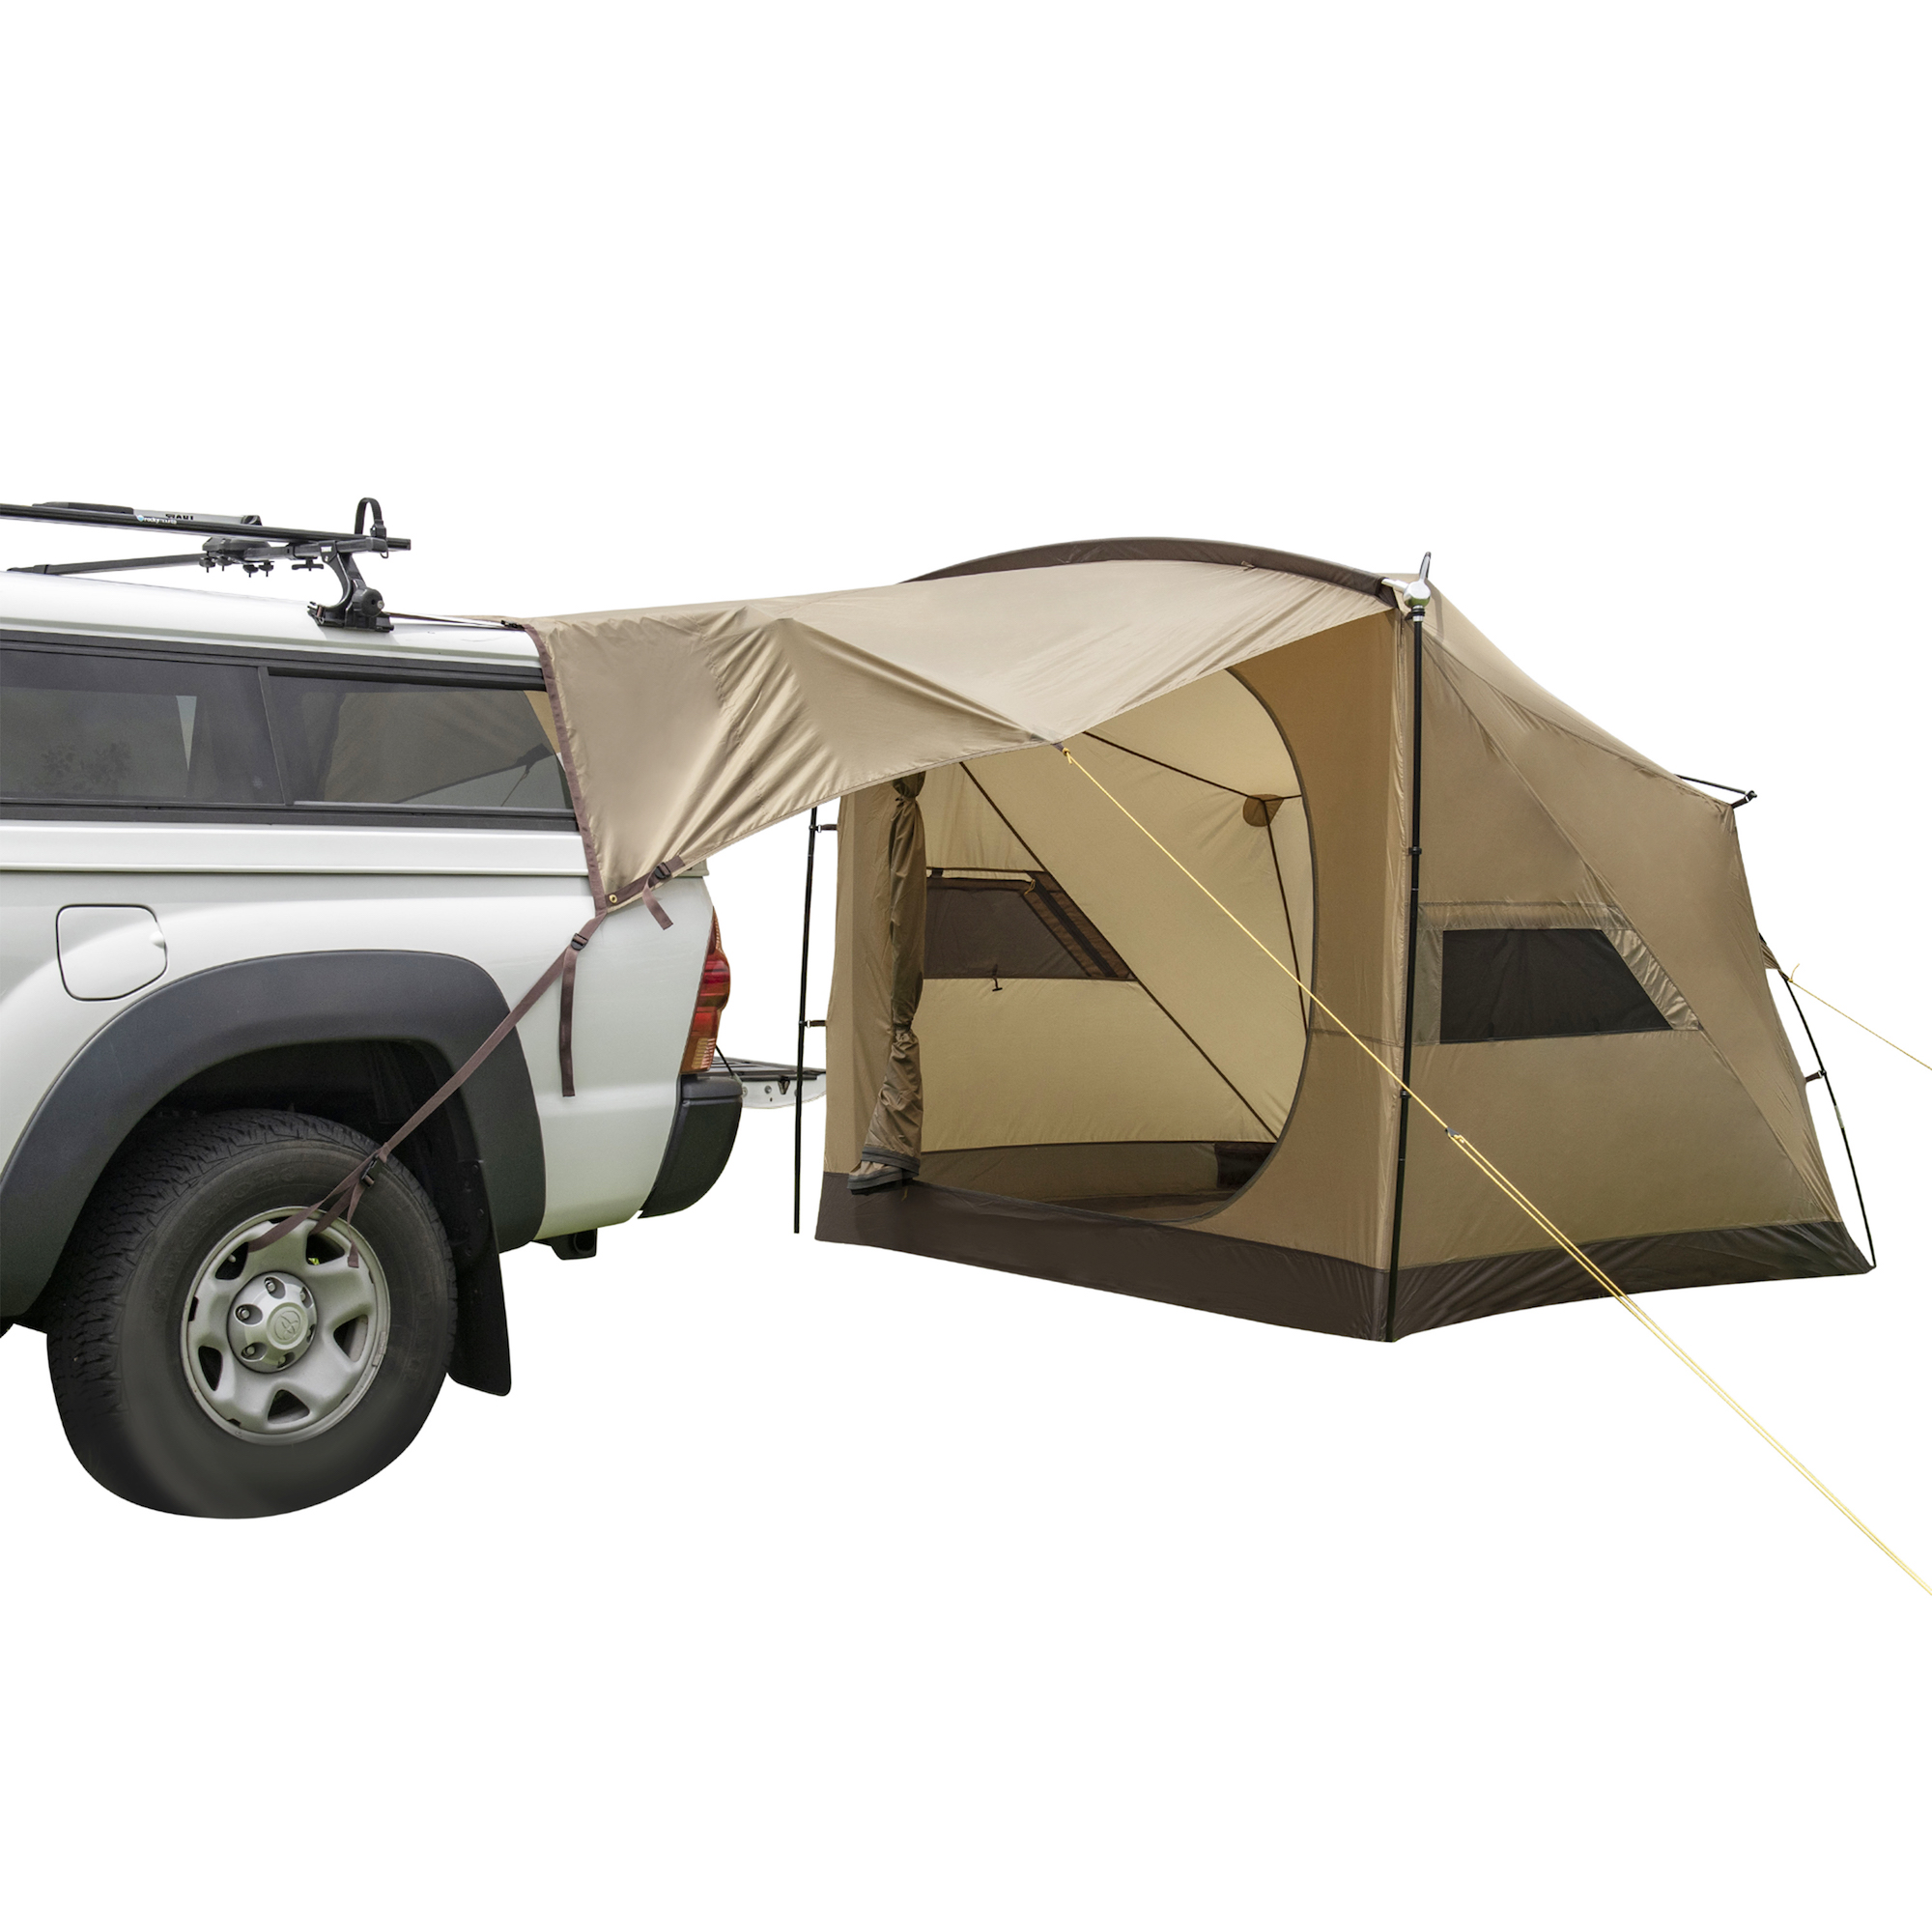 Slumberjack Introduces New Overland and Hunt Gear for Spring 2019